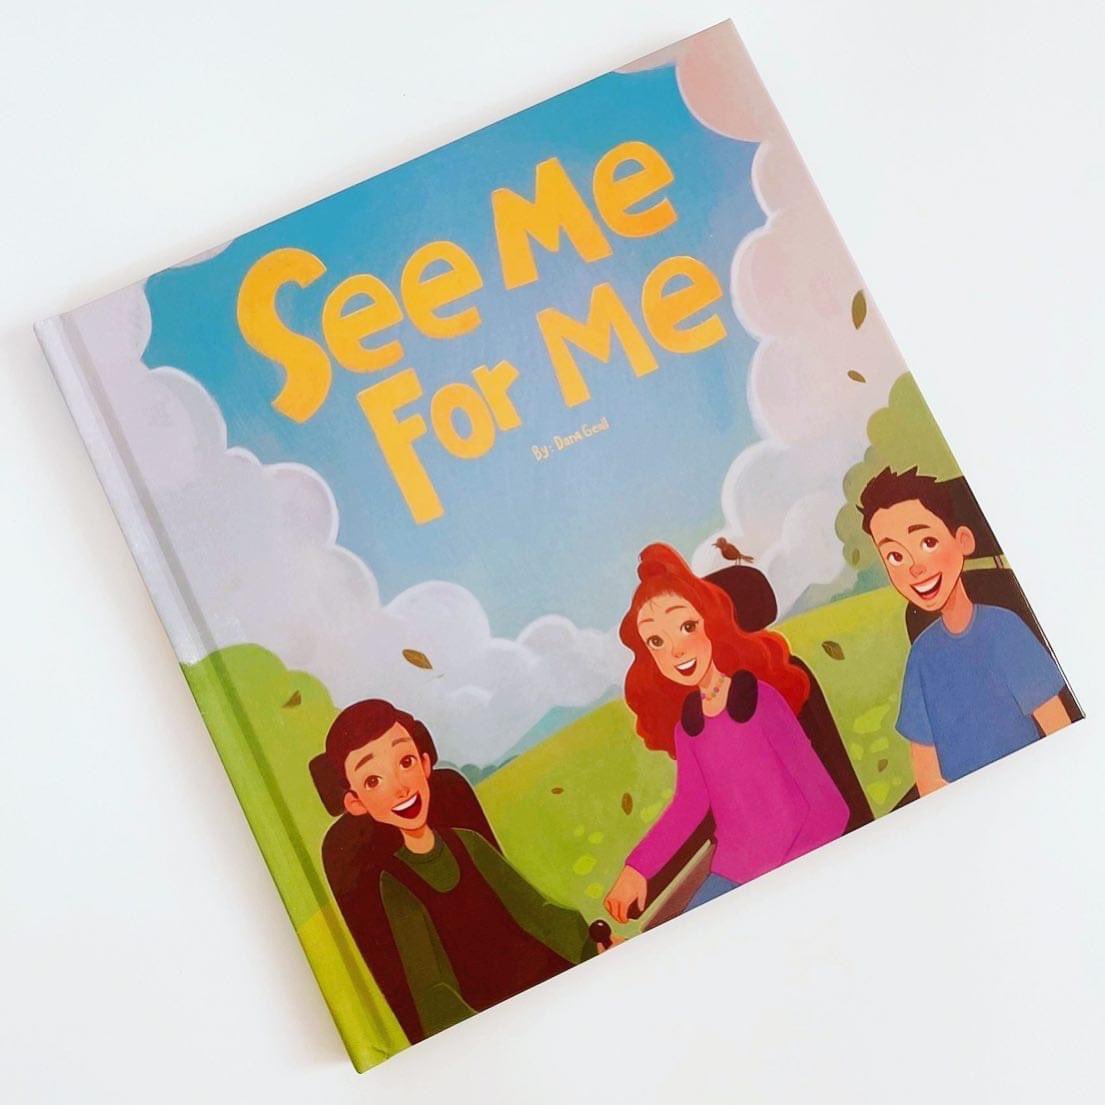 Our client, @DanaGeall was inspired by her children to write this book. The lessons of #inclusivity and empathy in “See Me for Me” are beautiful and important--we are proud to have shared dozens of copies with our clients!
#seemeforme #disability #disabilitybooks